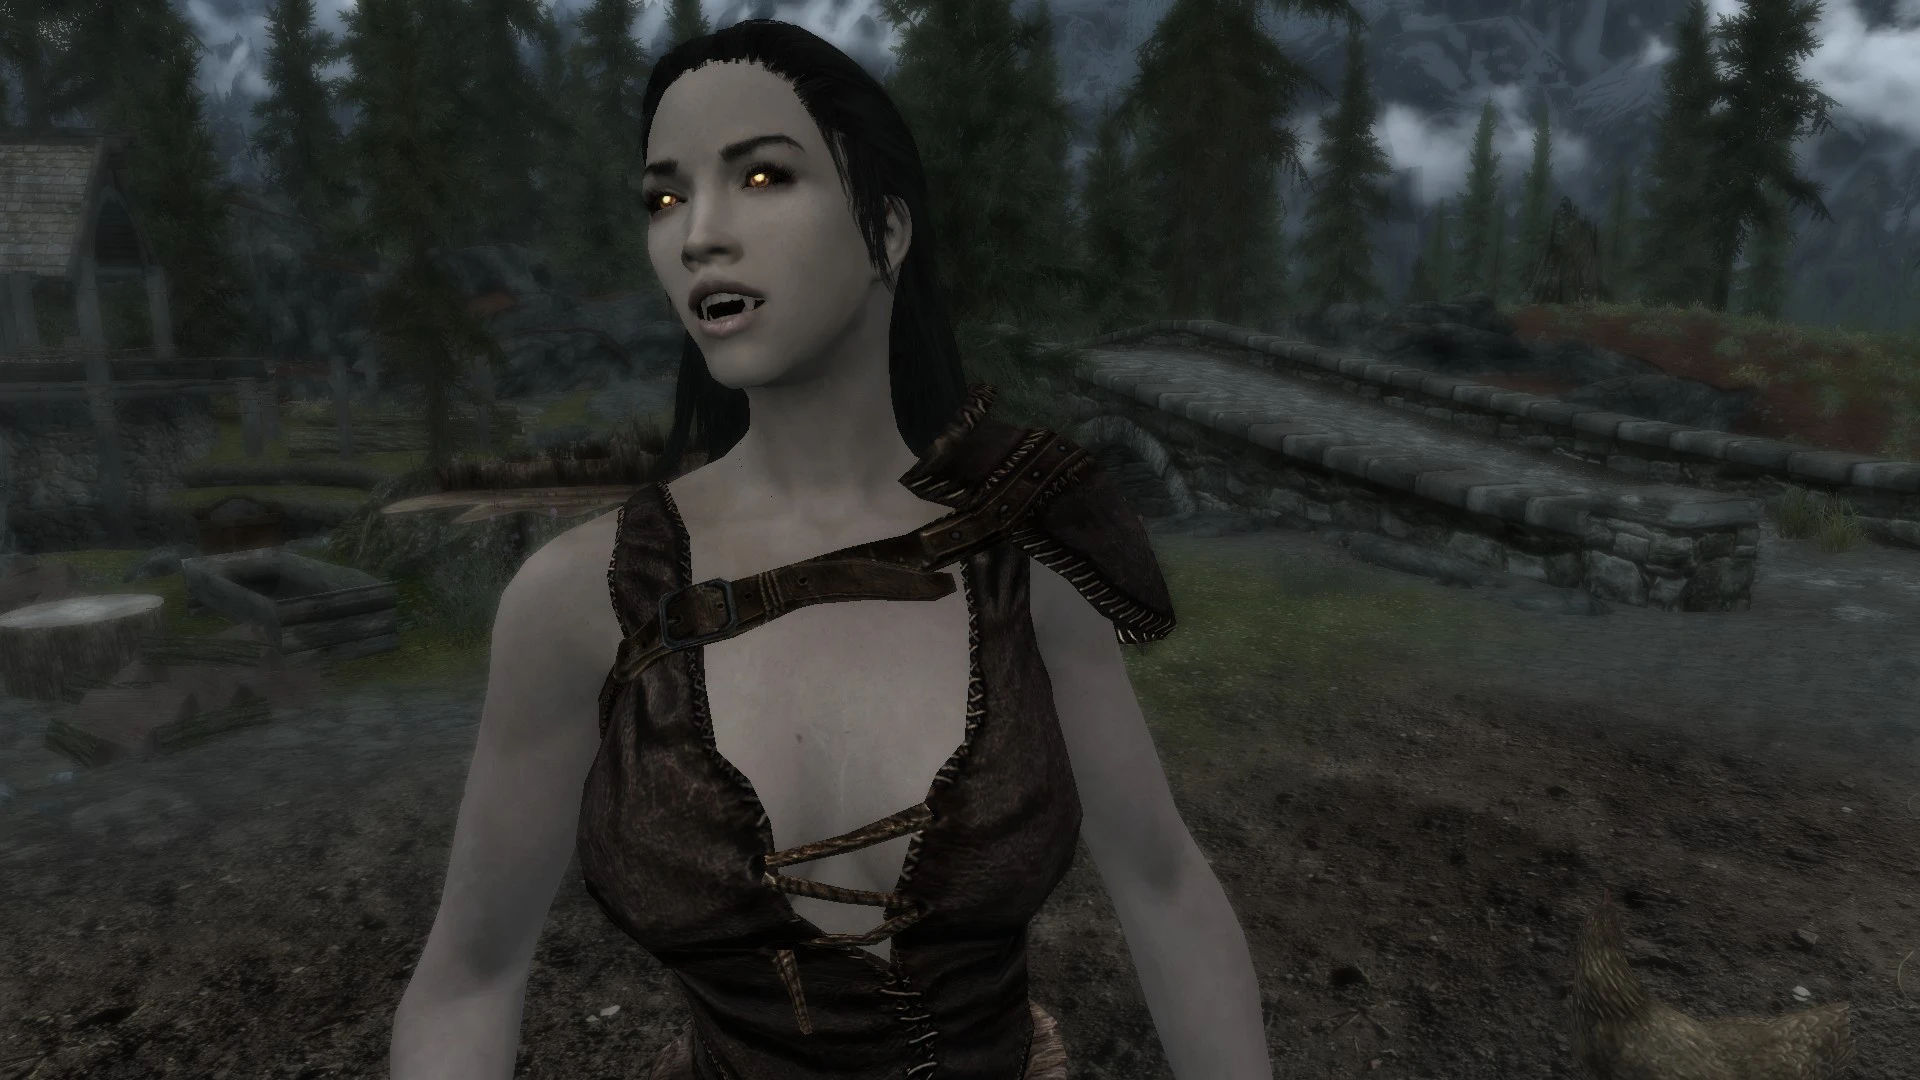 Sexy skyrim vampire tries command frost